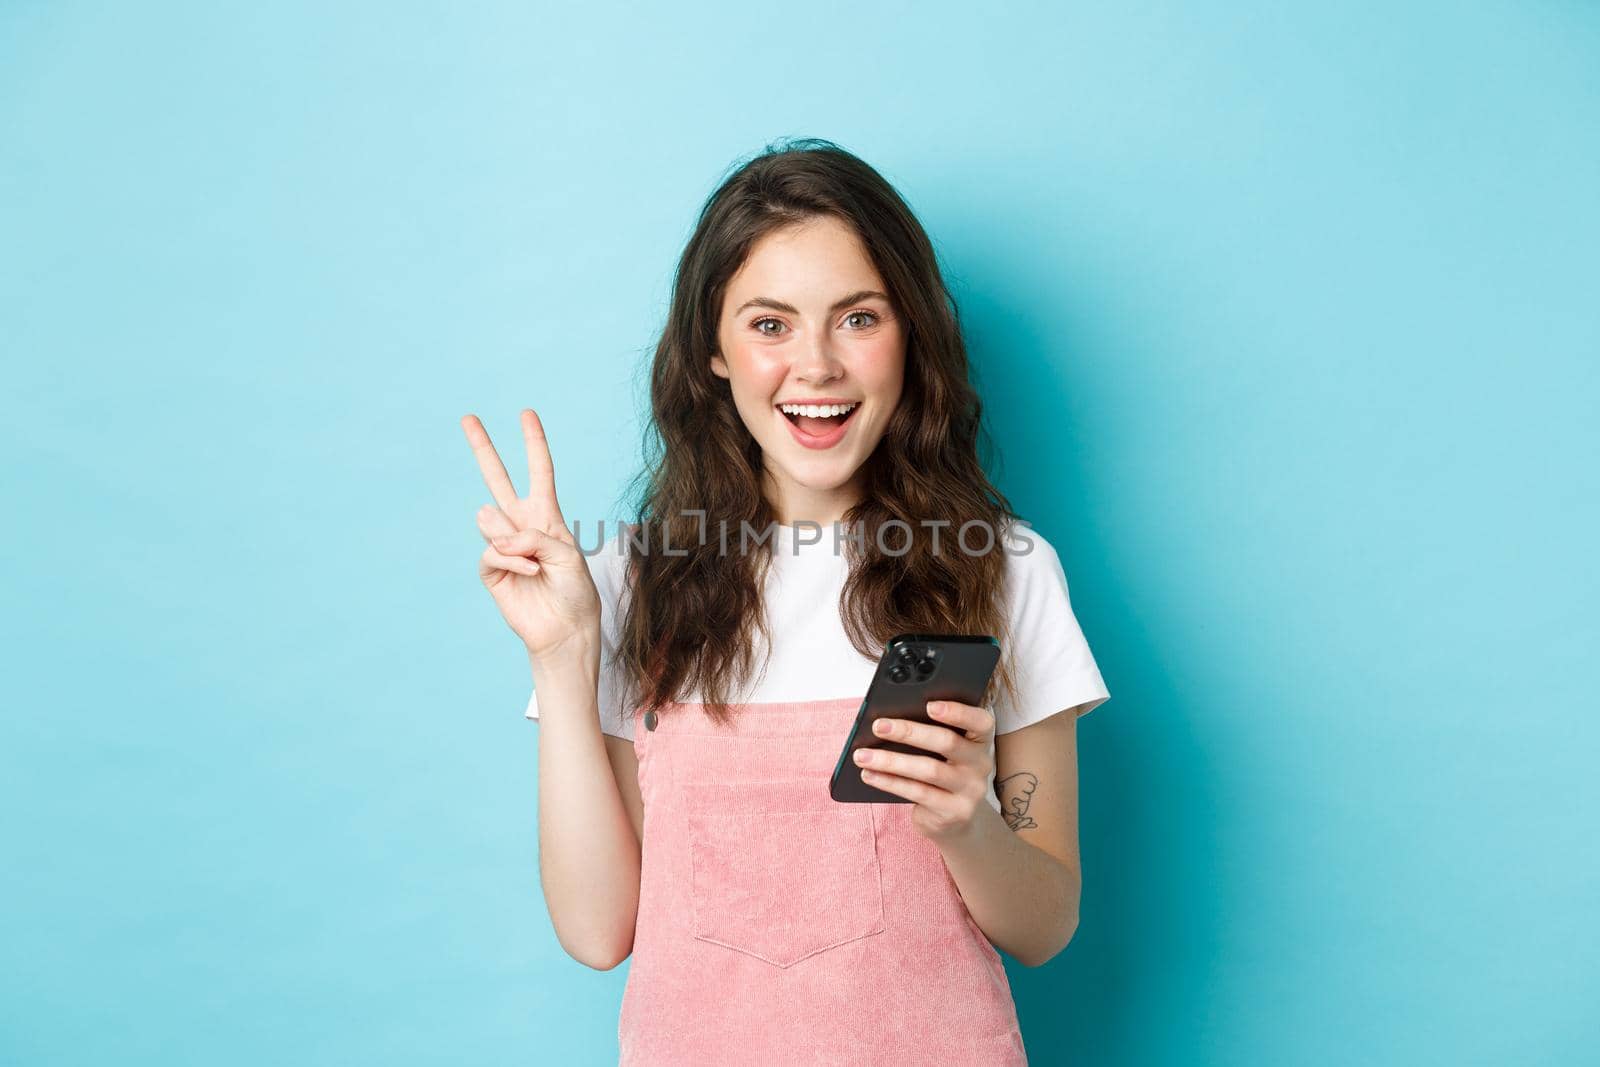 Online shopping. Positive smiling girl showing v-sign and looking happy at camera, using smartphone, holding mobile phone, standing against blue background.